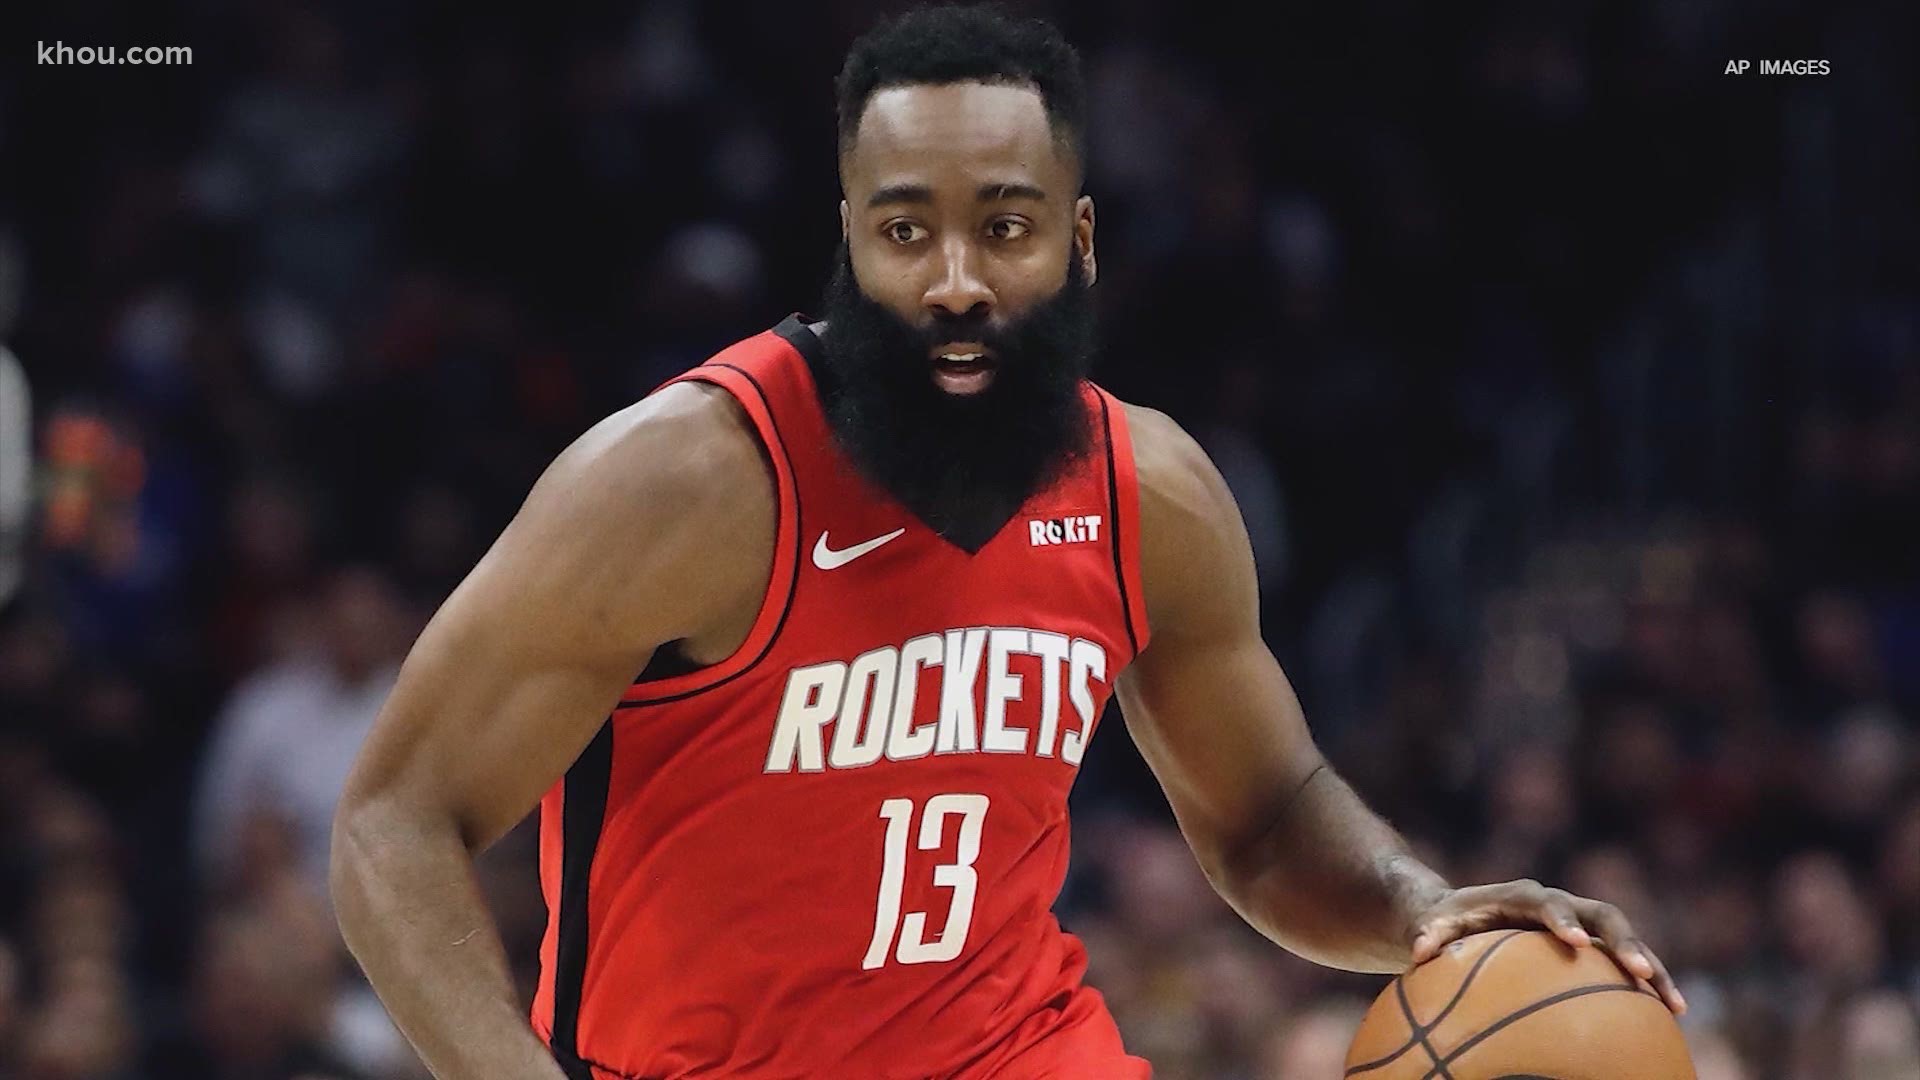 An ESPN report says Harden wants to play somewhere else, like Brooklyn or Philadelphia.